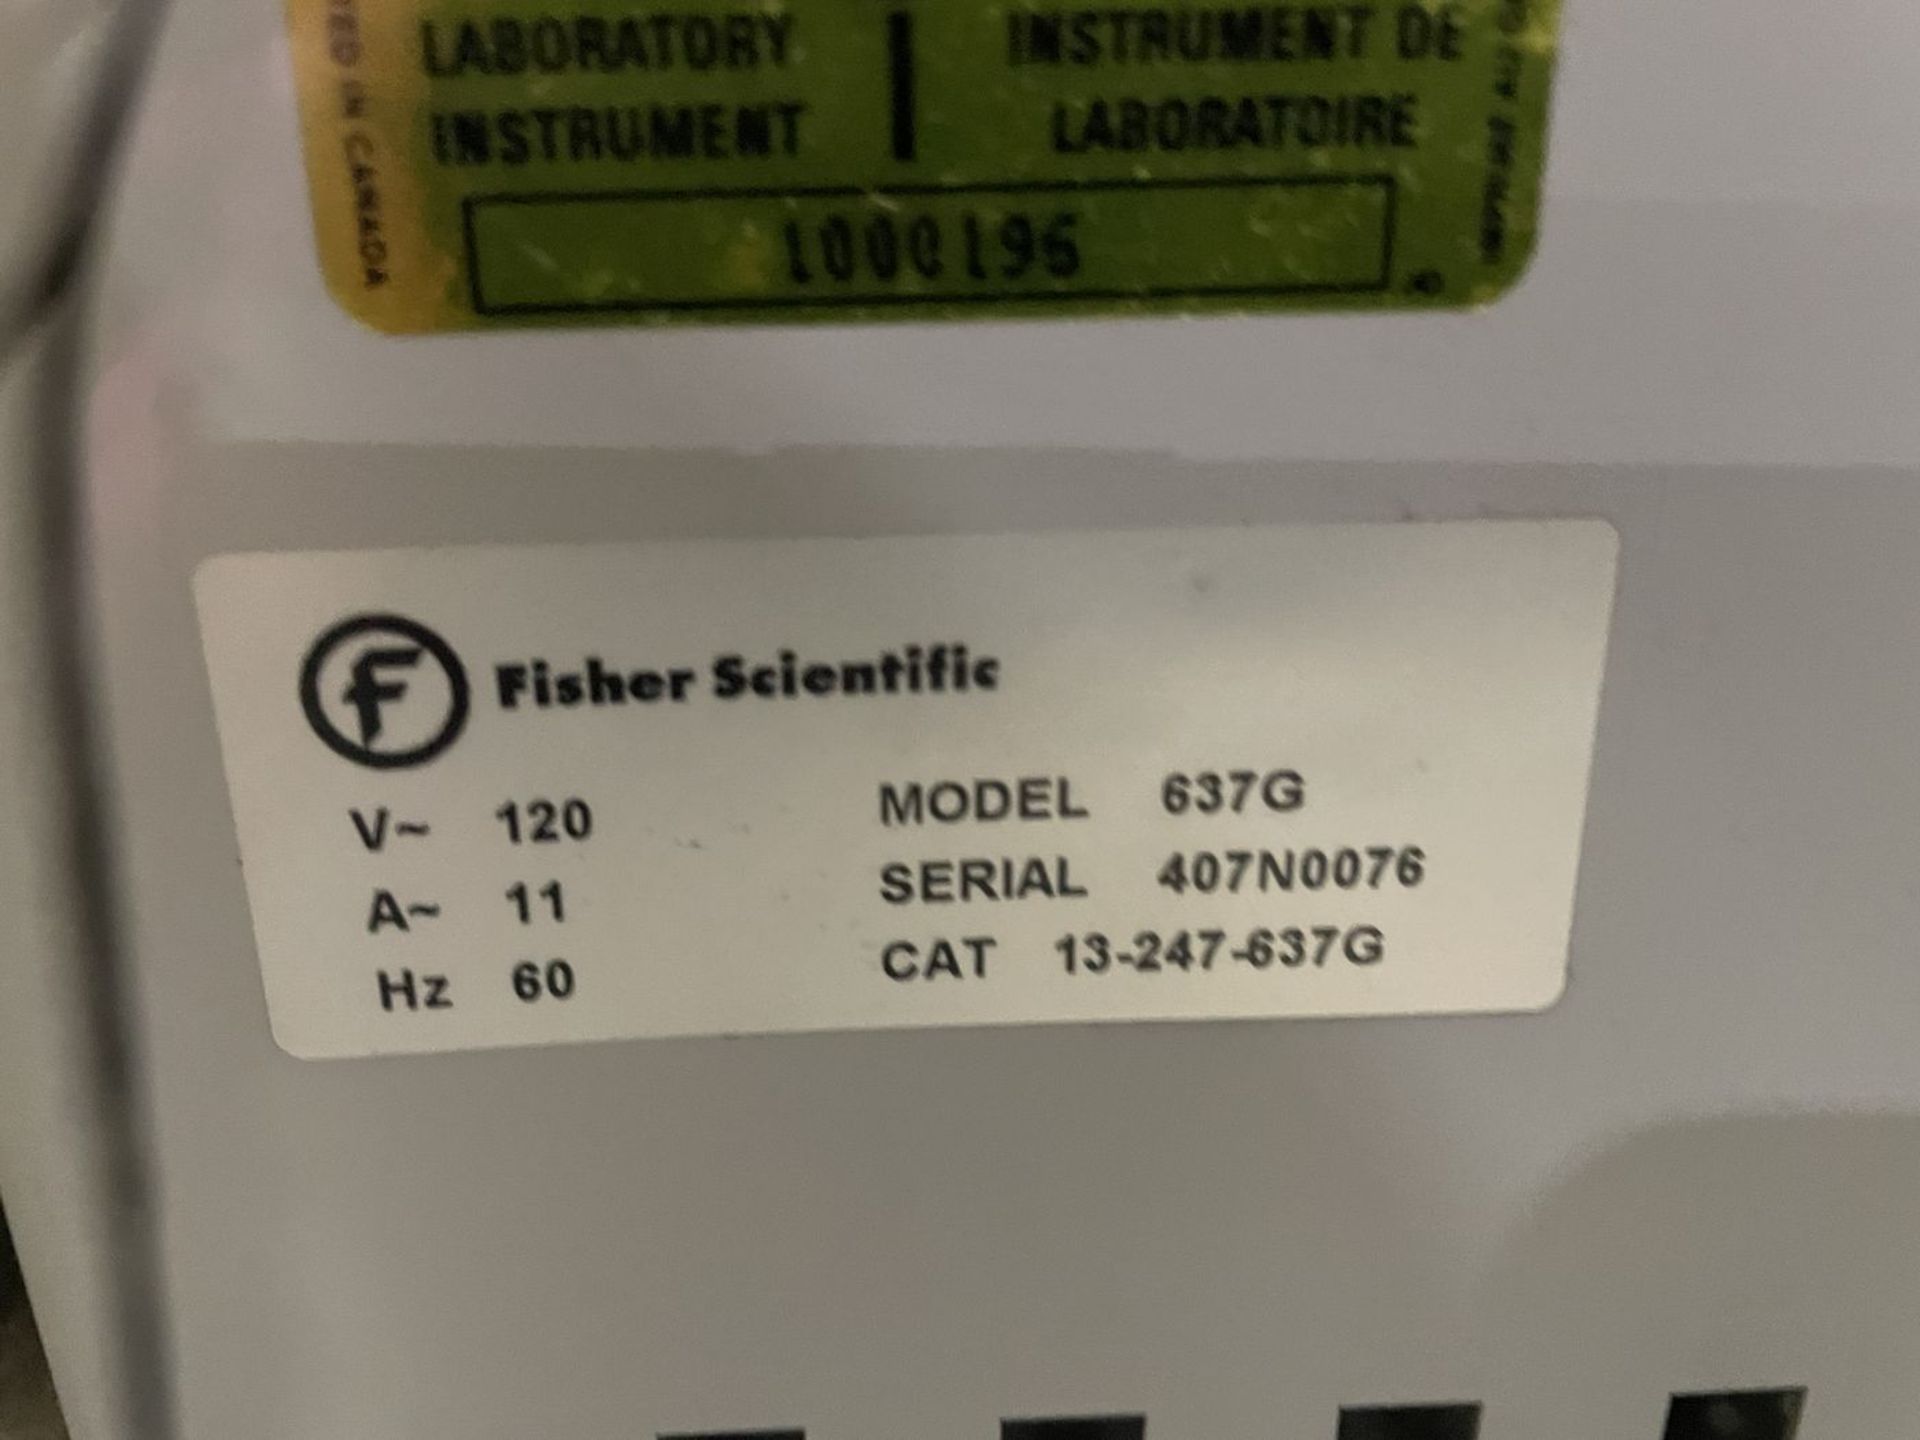 Fisher Scientific Iso-Temp Oven Model 637G, S/N: 407N0076, Catalog Number 13-247-637G (Removal - Image 2 of 2